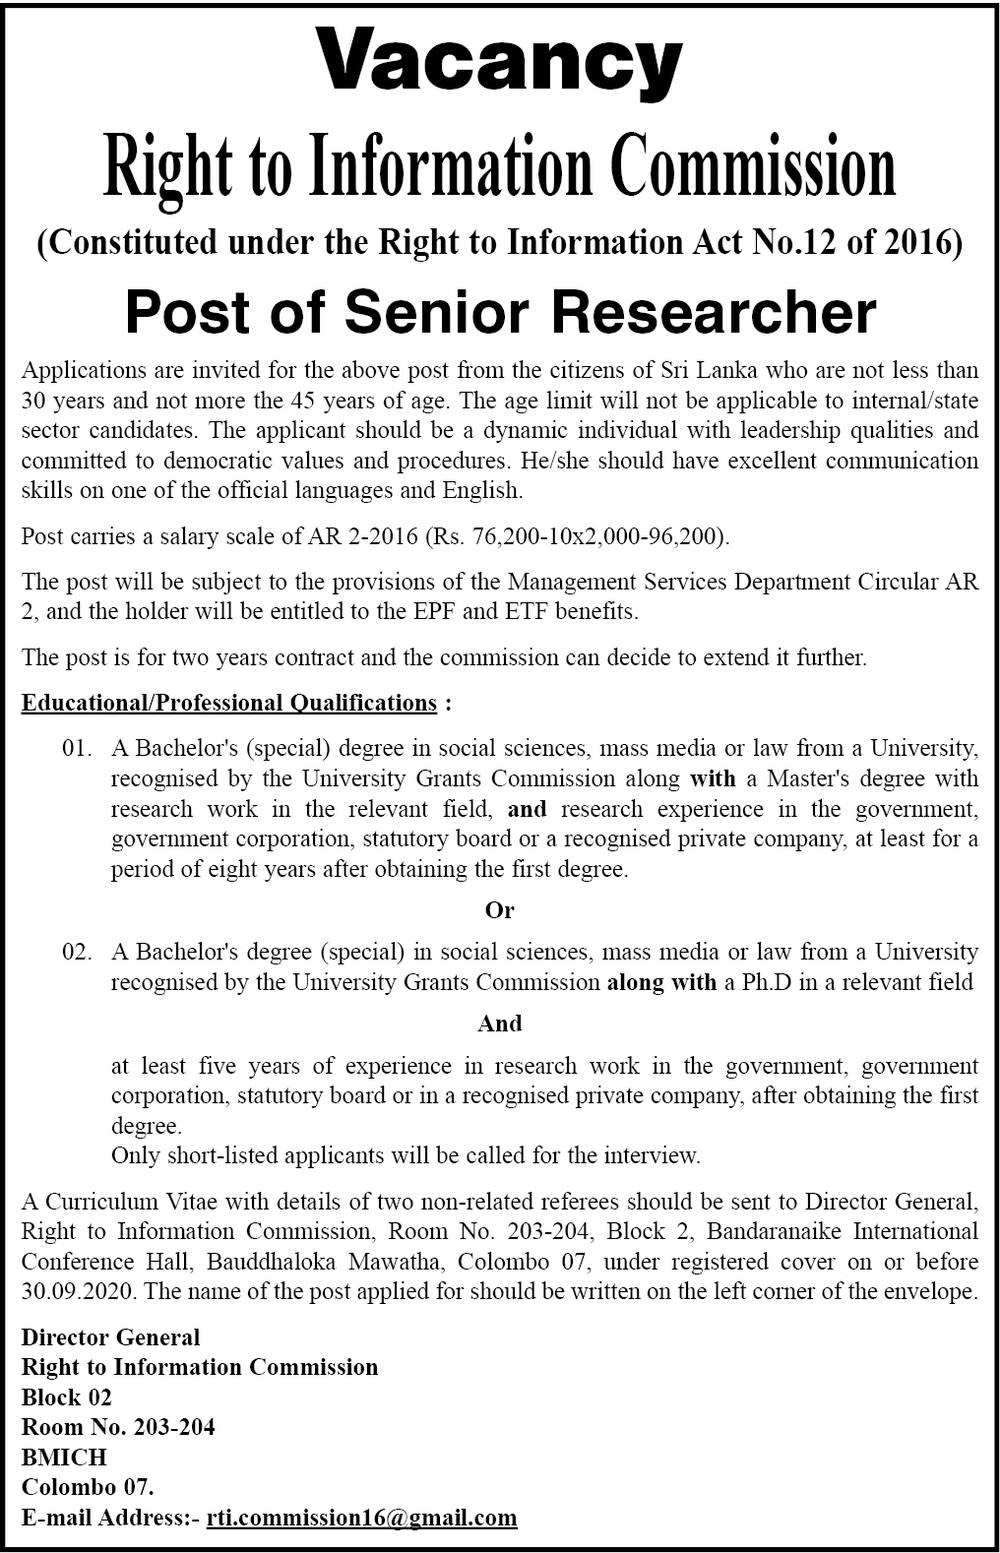 Senior Researcher – Right to Information Commission 2